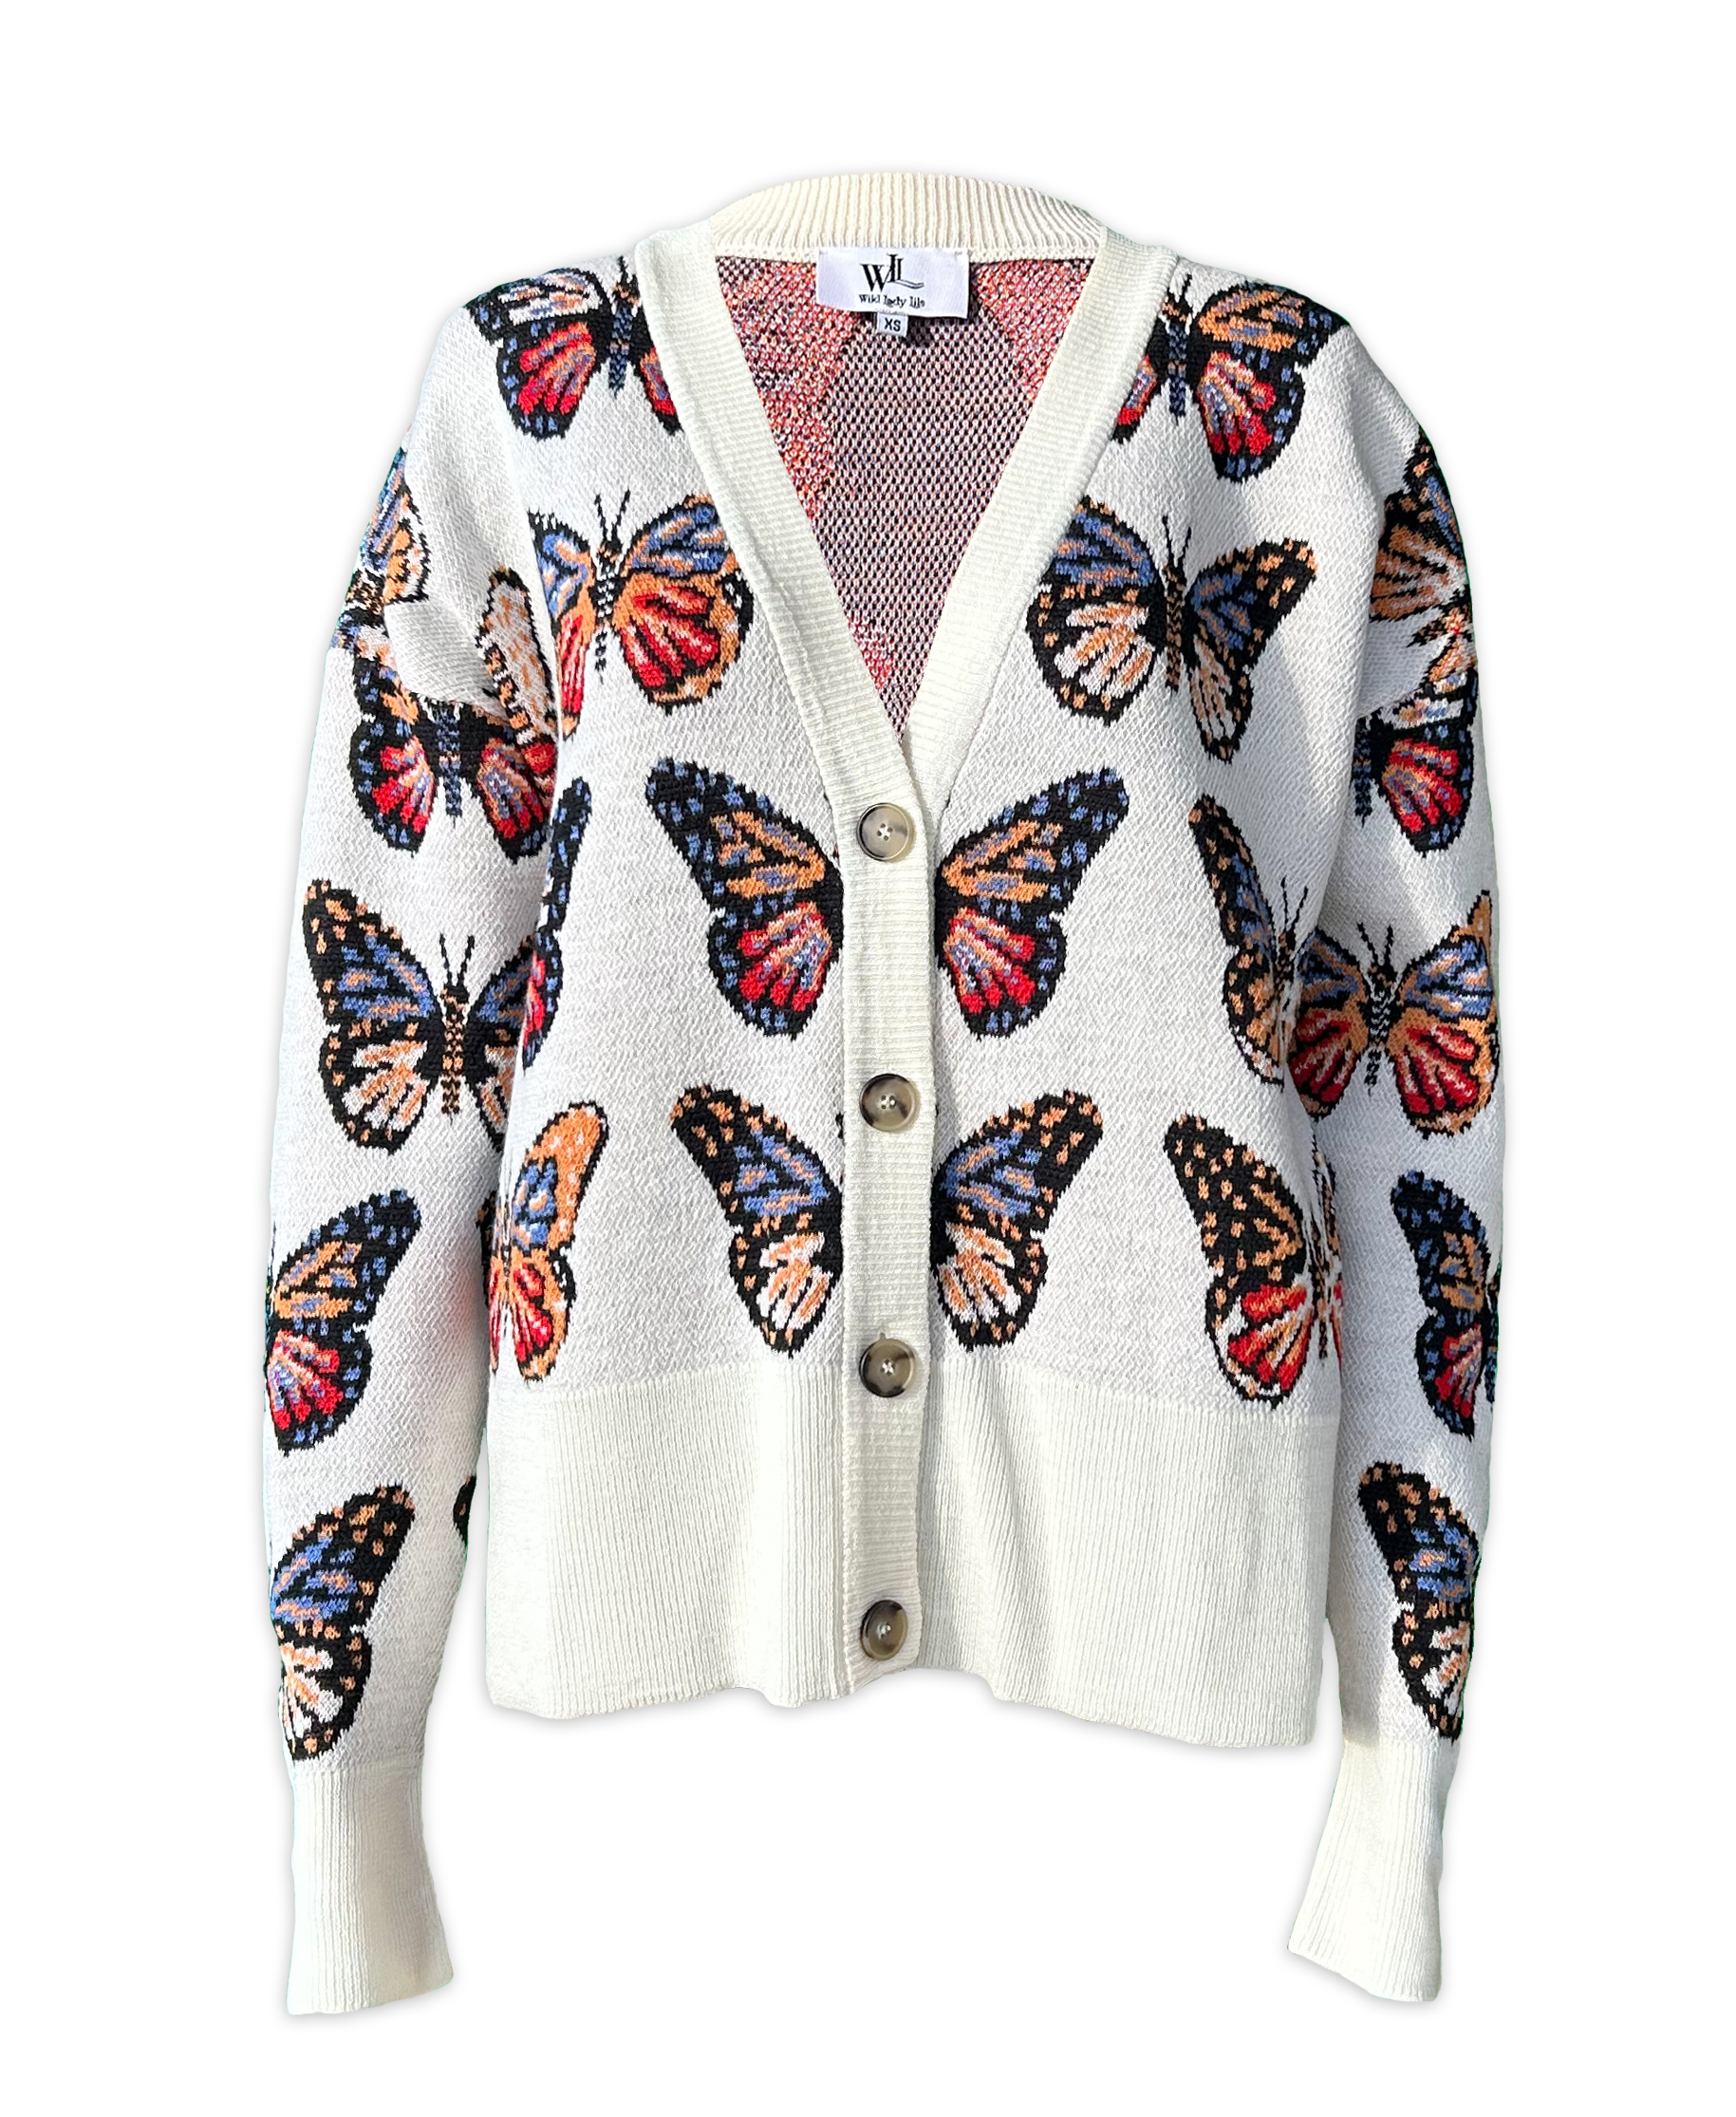 Merino Wool Cardigan in Milky White with butterflies in shades of red, blue, tangerine, and black.  Made in family owned factory in Italy.